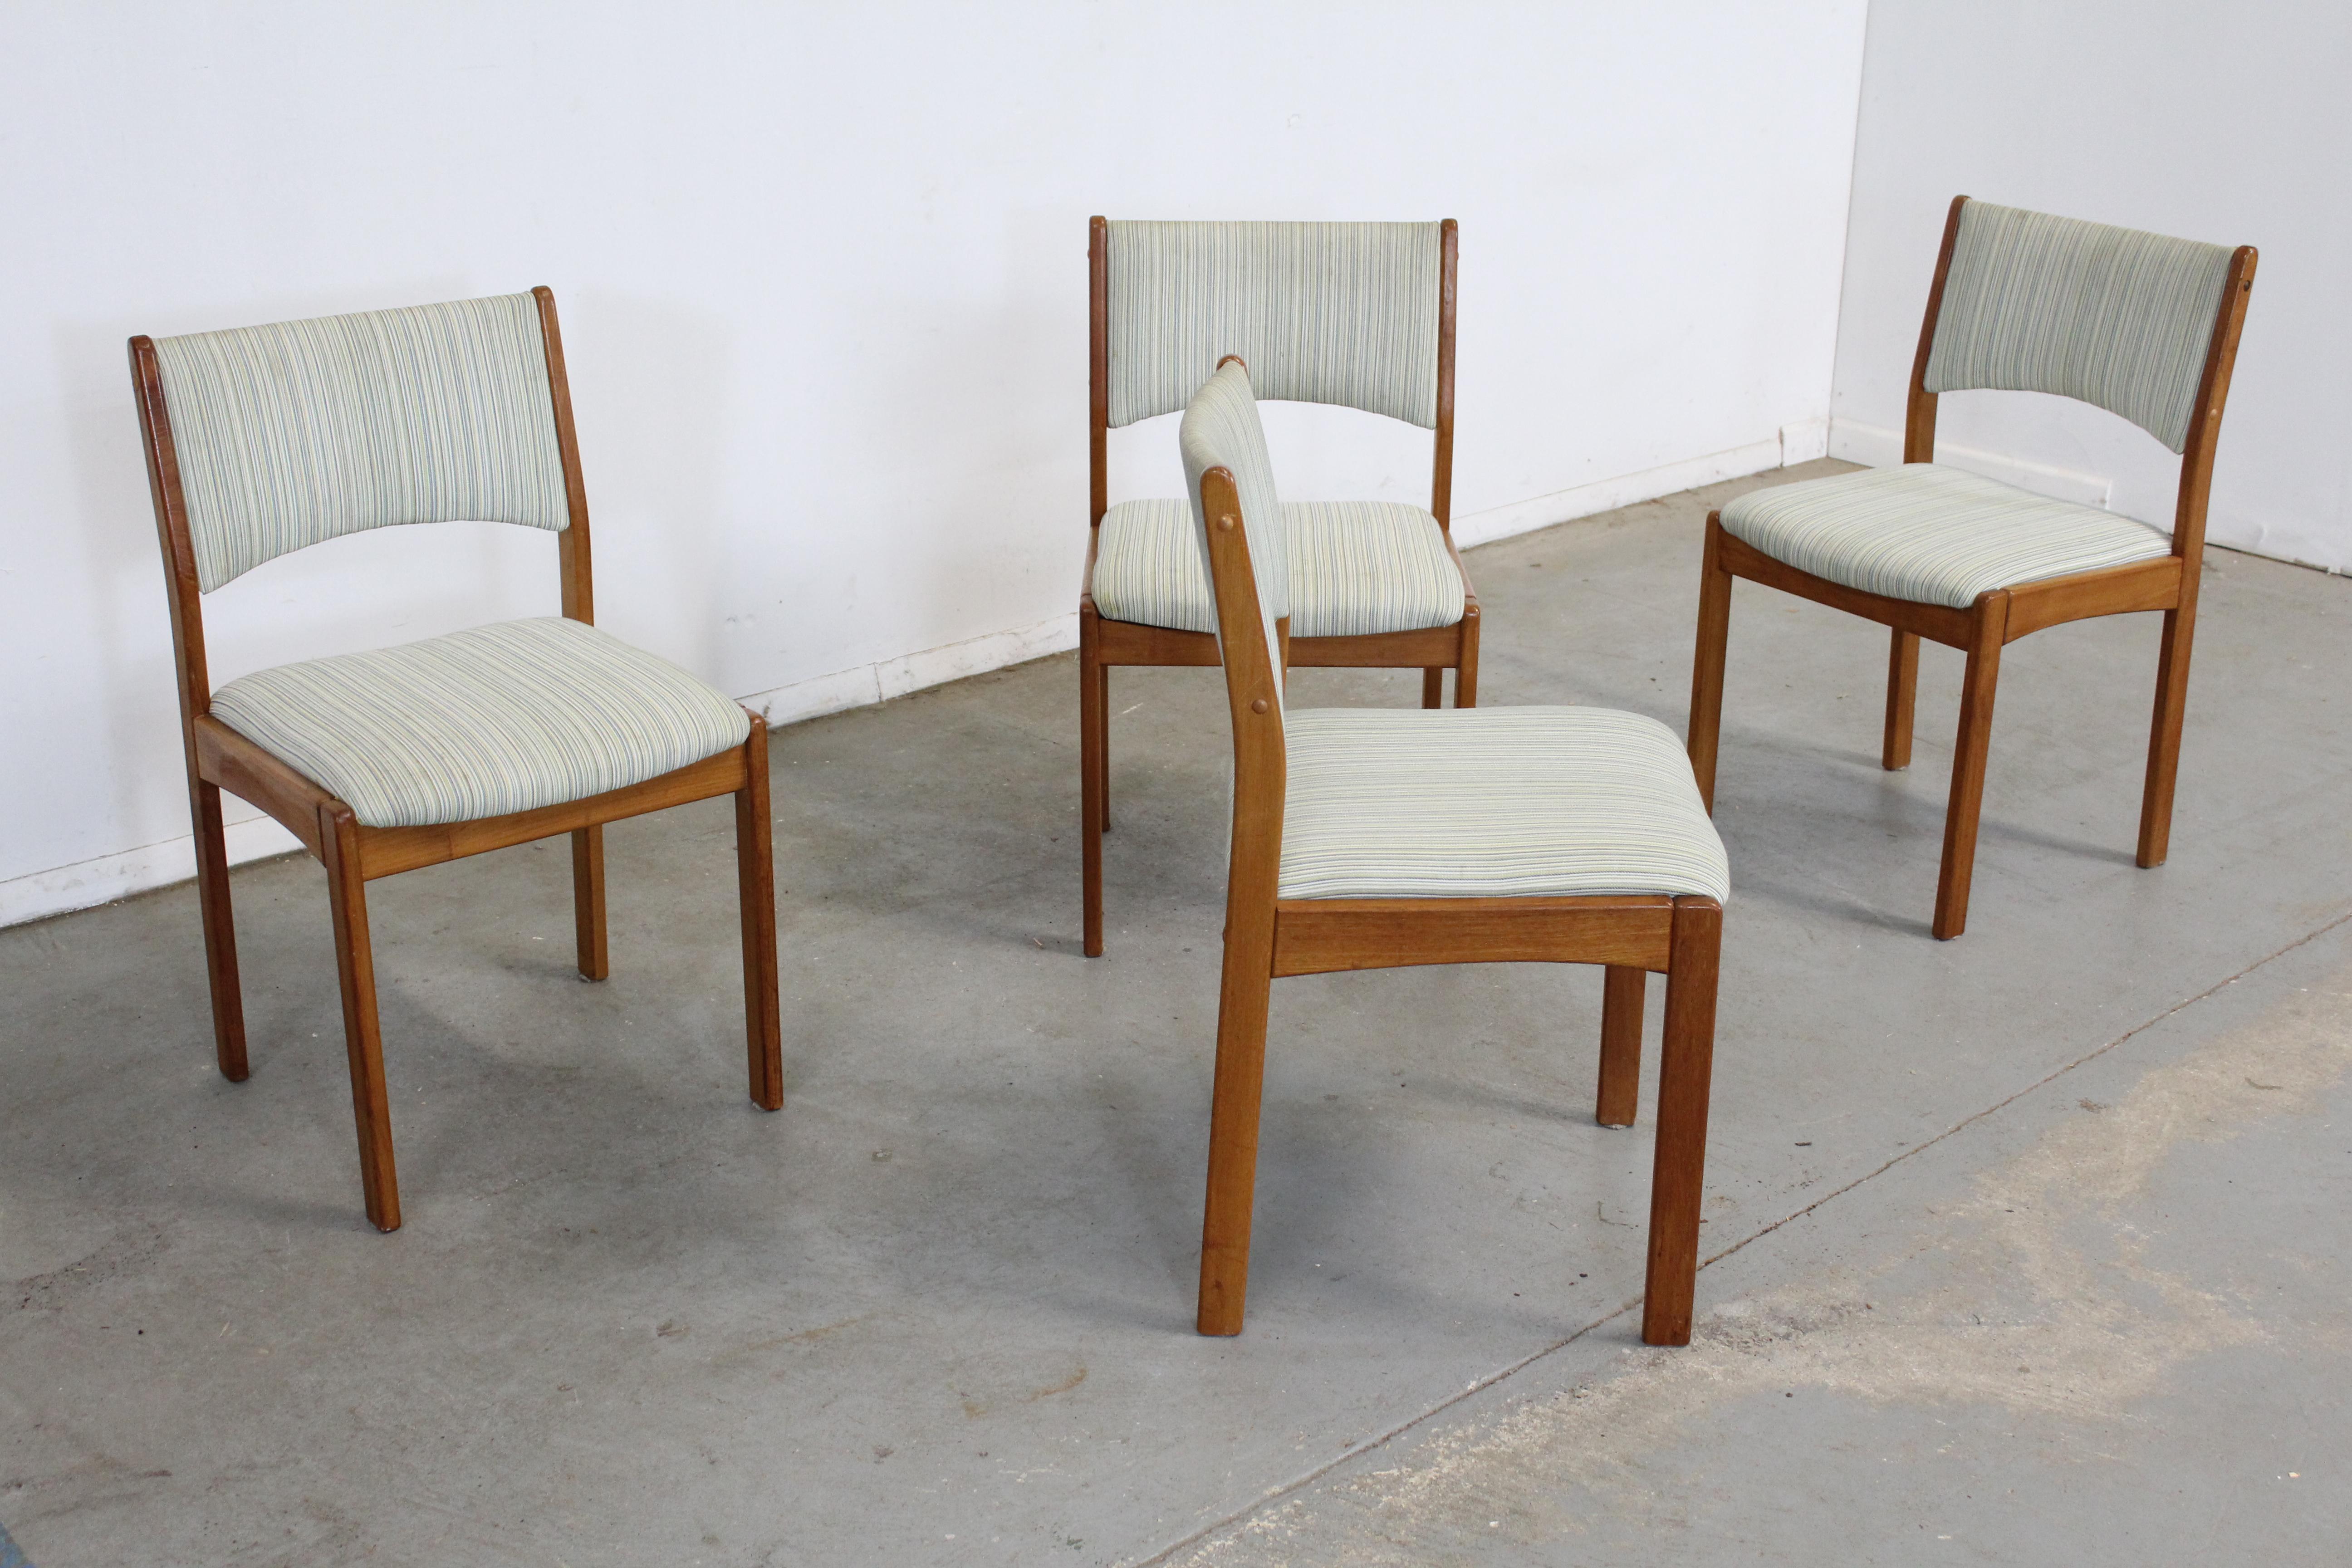 Set of 4 Scandinavian Modern teak side dining chairs 

Offered is a vintage set of 4 vintage Danish modern teak side dining chairs with teak backs. This set has simple, but modern lines and could make an excellent addition to any home. They are in